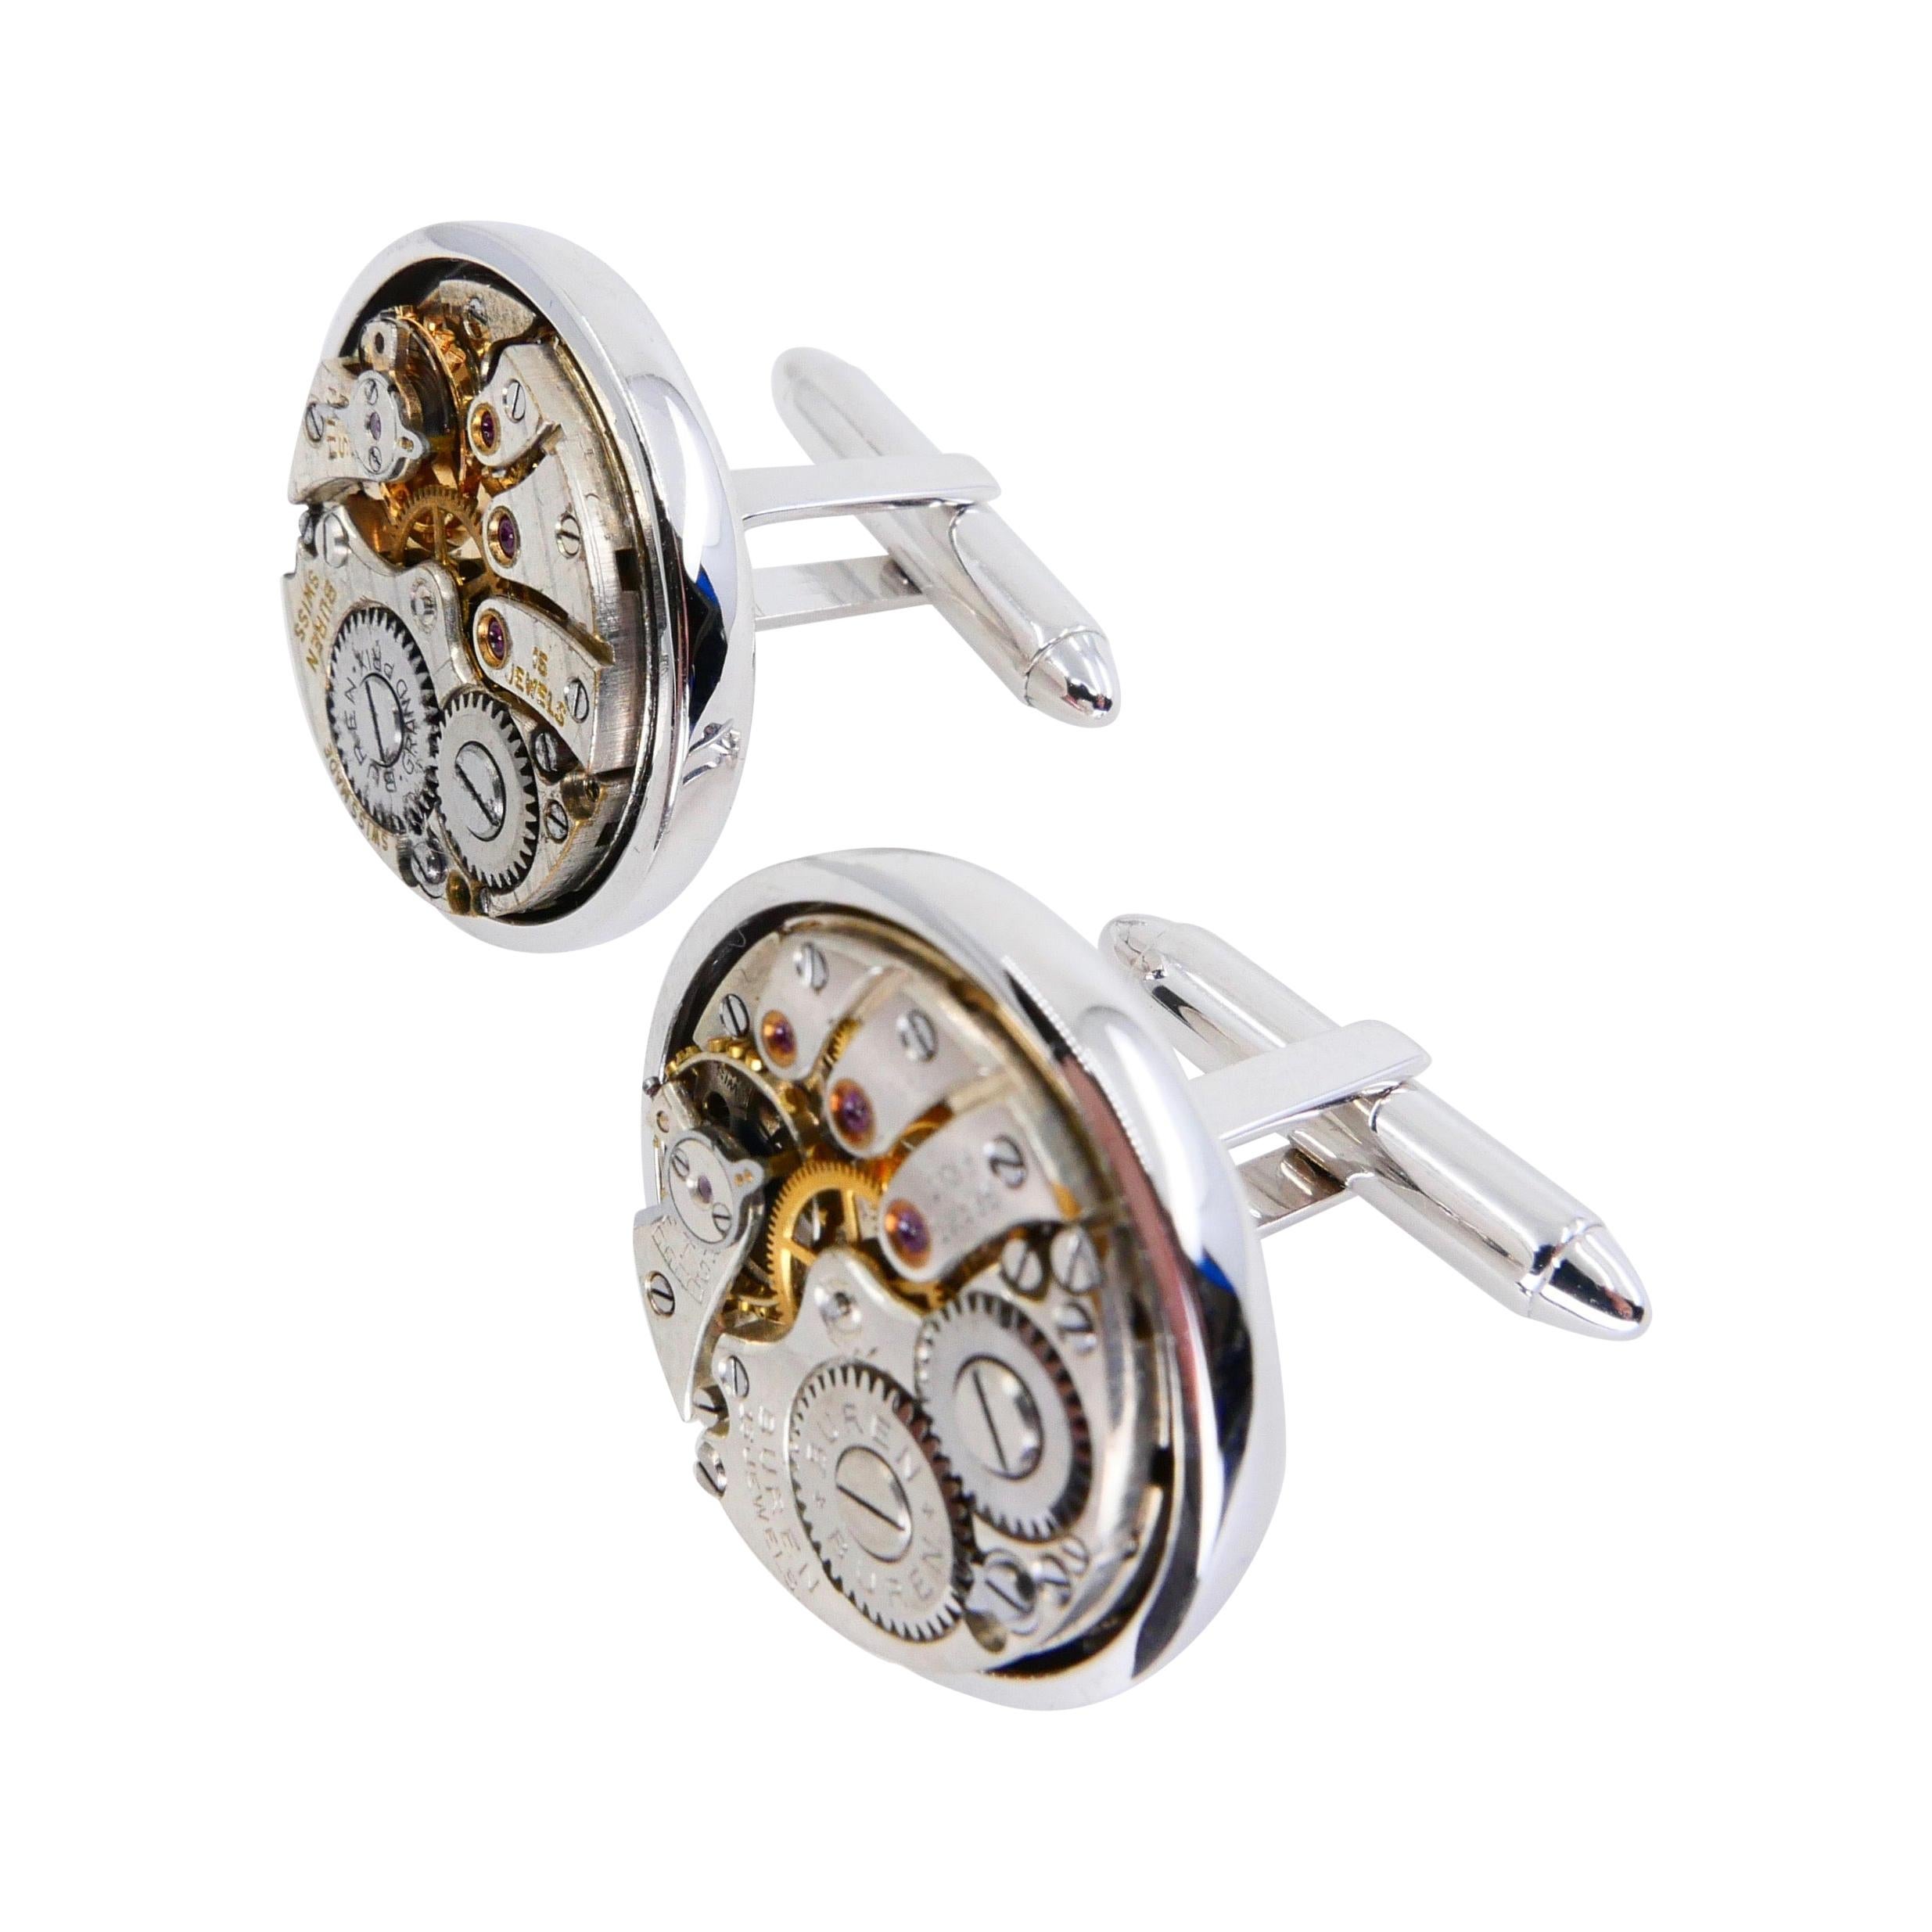 Men's Solid 18 Karat White Gold Round Cufflinks with Mechanical Watch Movements In New Condition For Sale In Hong Kong, HK